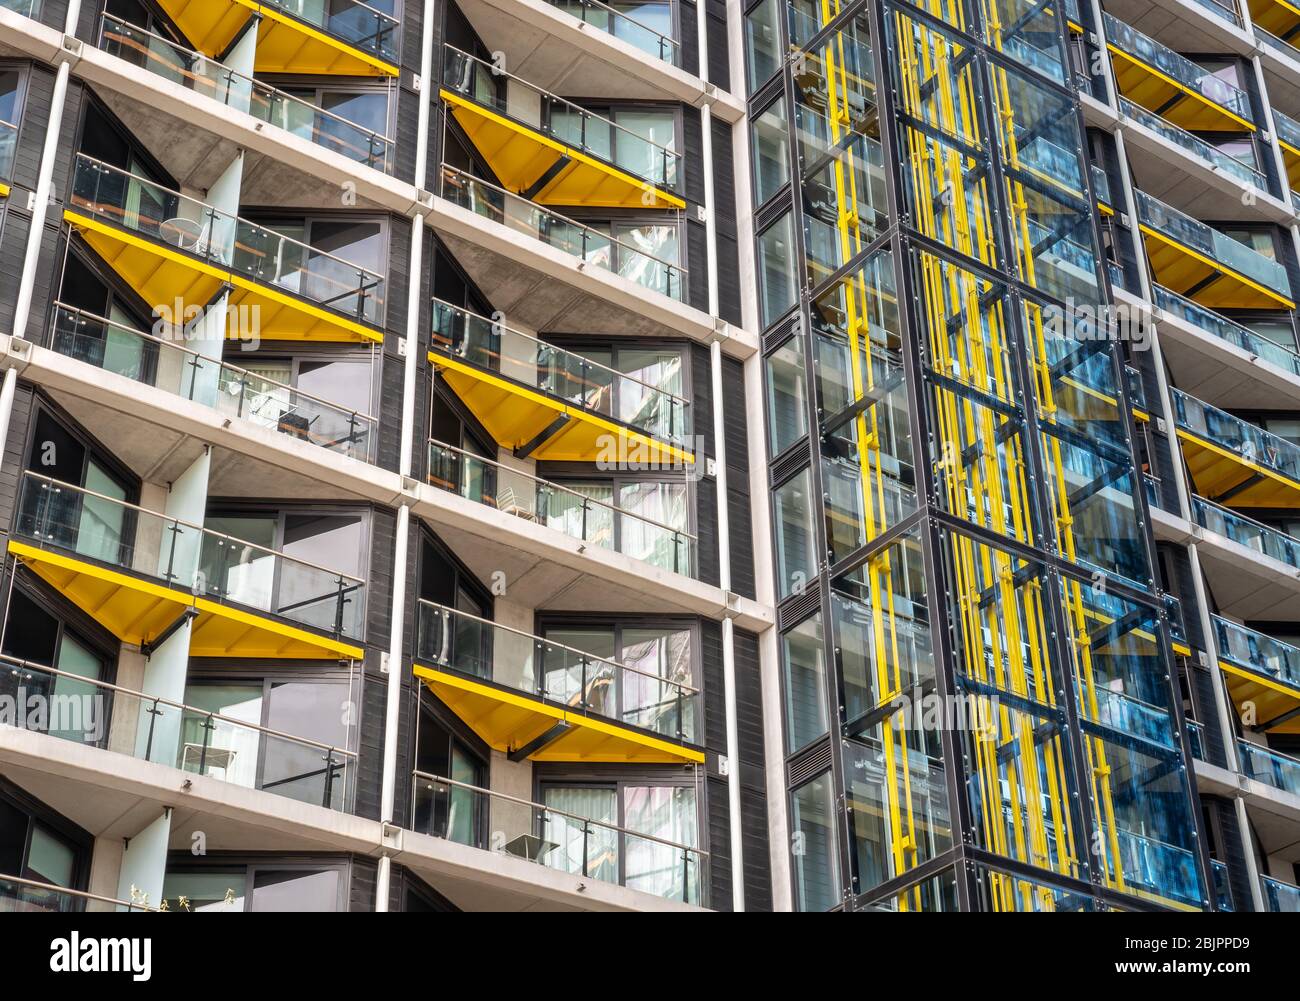 Modern flats. Full frame detail of a contemporary London apartment block with open balconies and a glass external lift shaft. Stock Photo